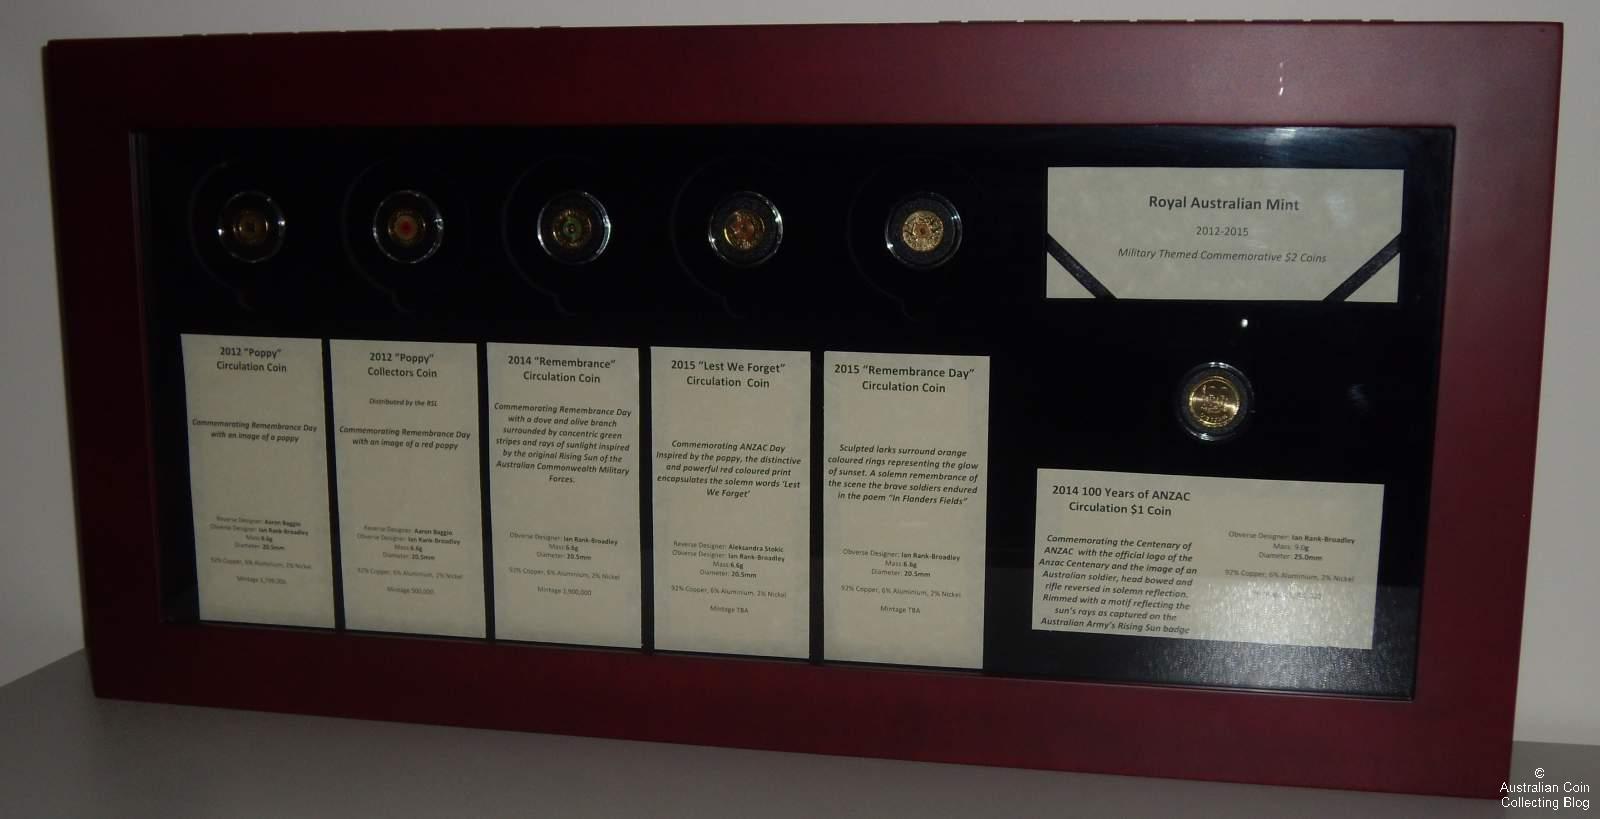 Australian Coin Display Featuring Military Themed Commemorative Dollar and $2 Coins